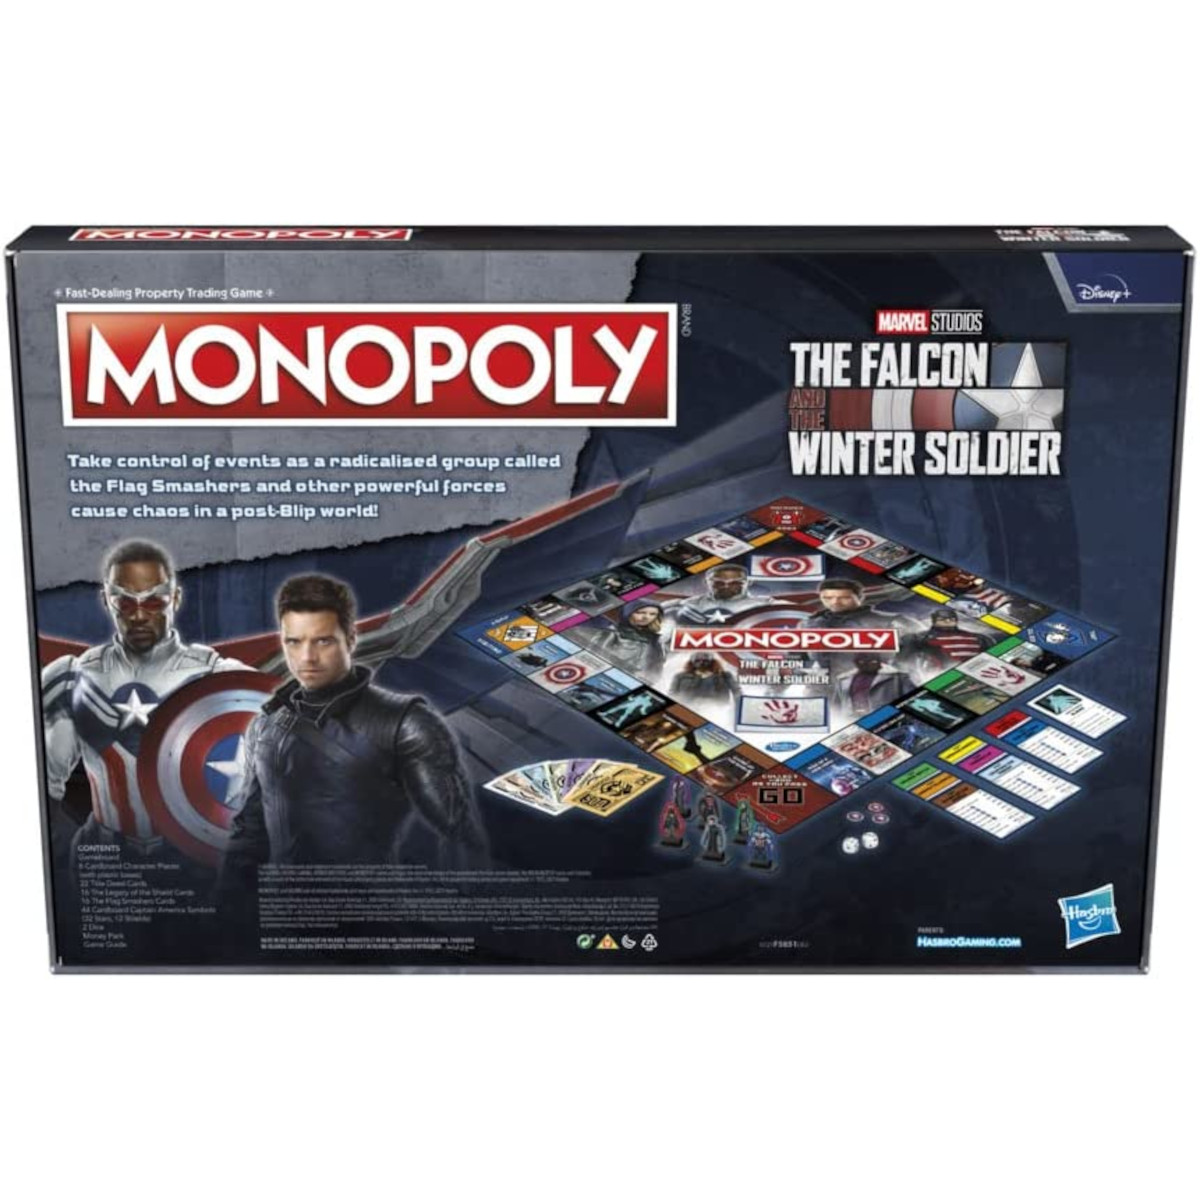 Monopoly - The Falcon and the Winter Soldier (englisch)